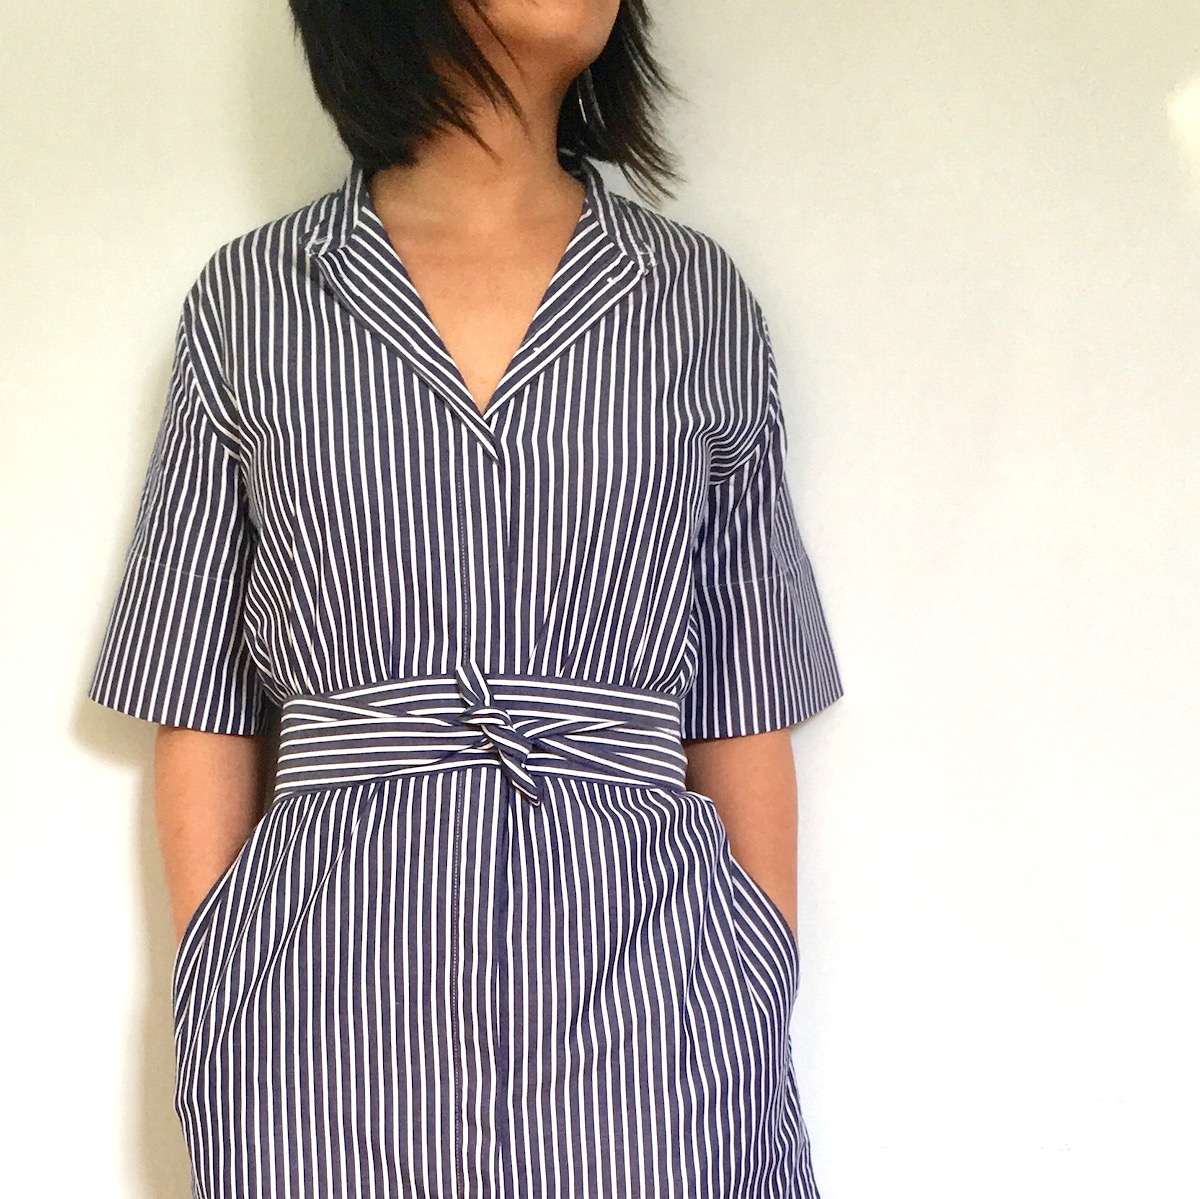 A woman with black hair wearing the striped Everlane cotton collarless belted shirt dress. Her hands are in the pockets.